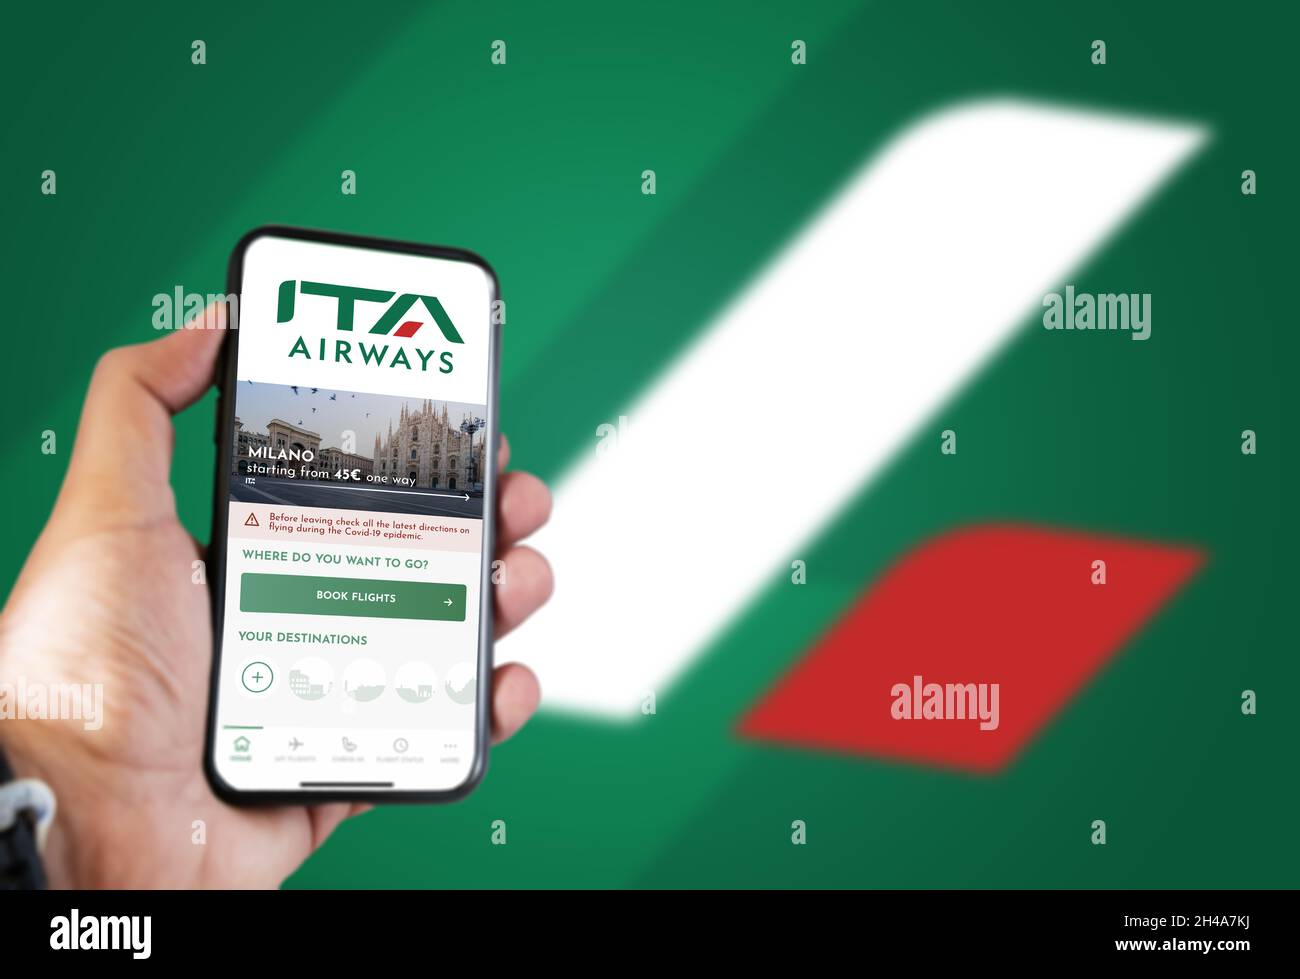 Rome, IT, October 2021: hand holding a phone with the ITA Airways app on the screen and the logo blurred on a green background.ITA Airways is the new Stock Photo